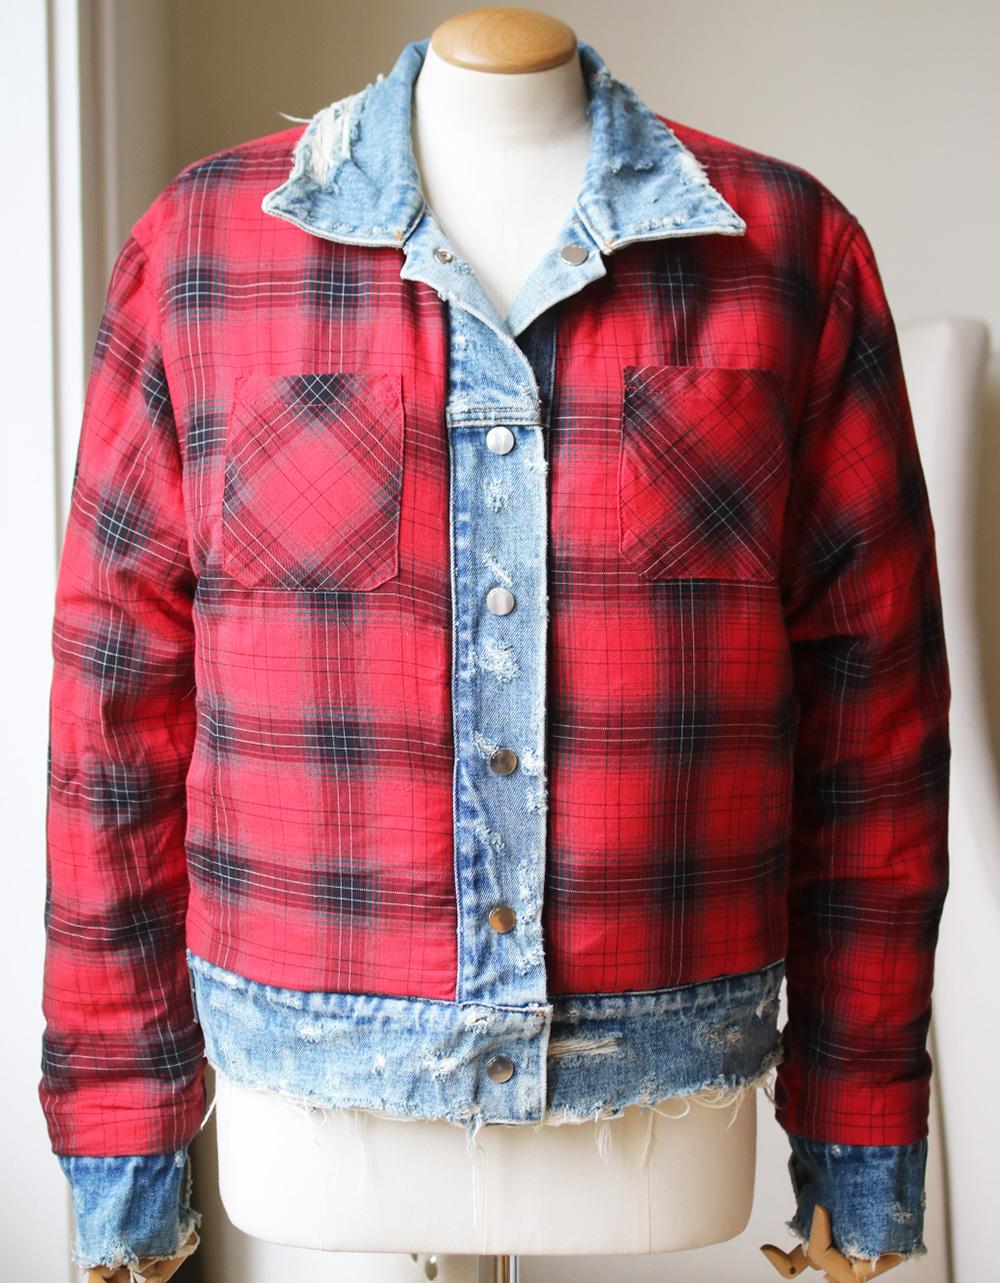 Reversible bomber jacket by Amiri with distressed denim and checked cotton flannel.
Blue denim and red flannel. 
Snap button fastenings through front.
100% Cotton; contrast: 85% cotton 15% cashmere.

Size: UK 8 (US 4, FR 36, IT 40)

Condition: As